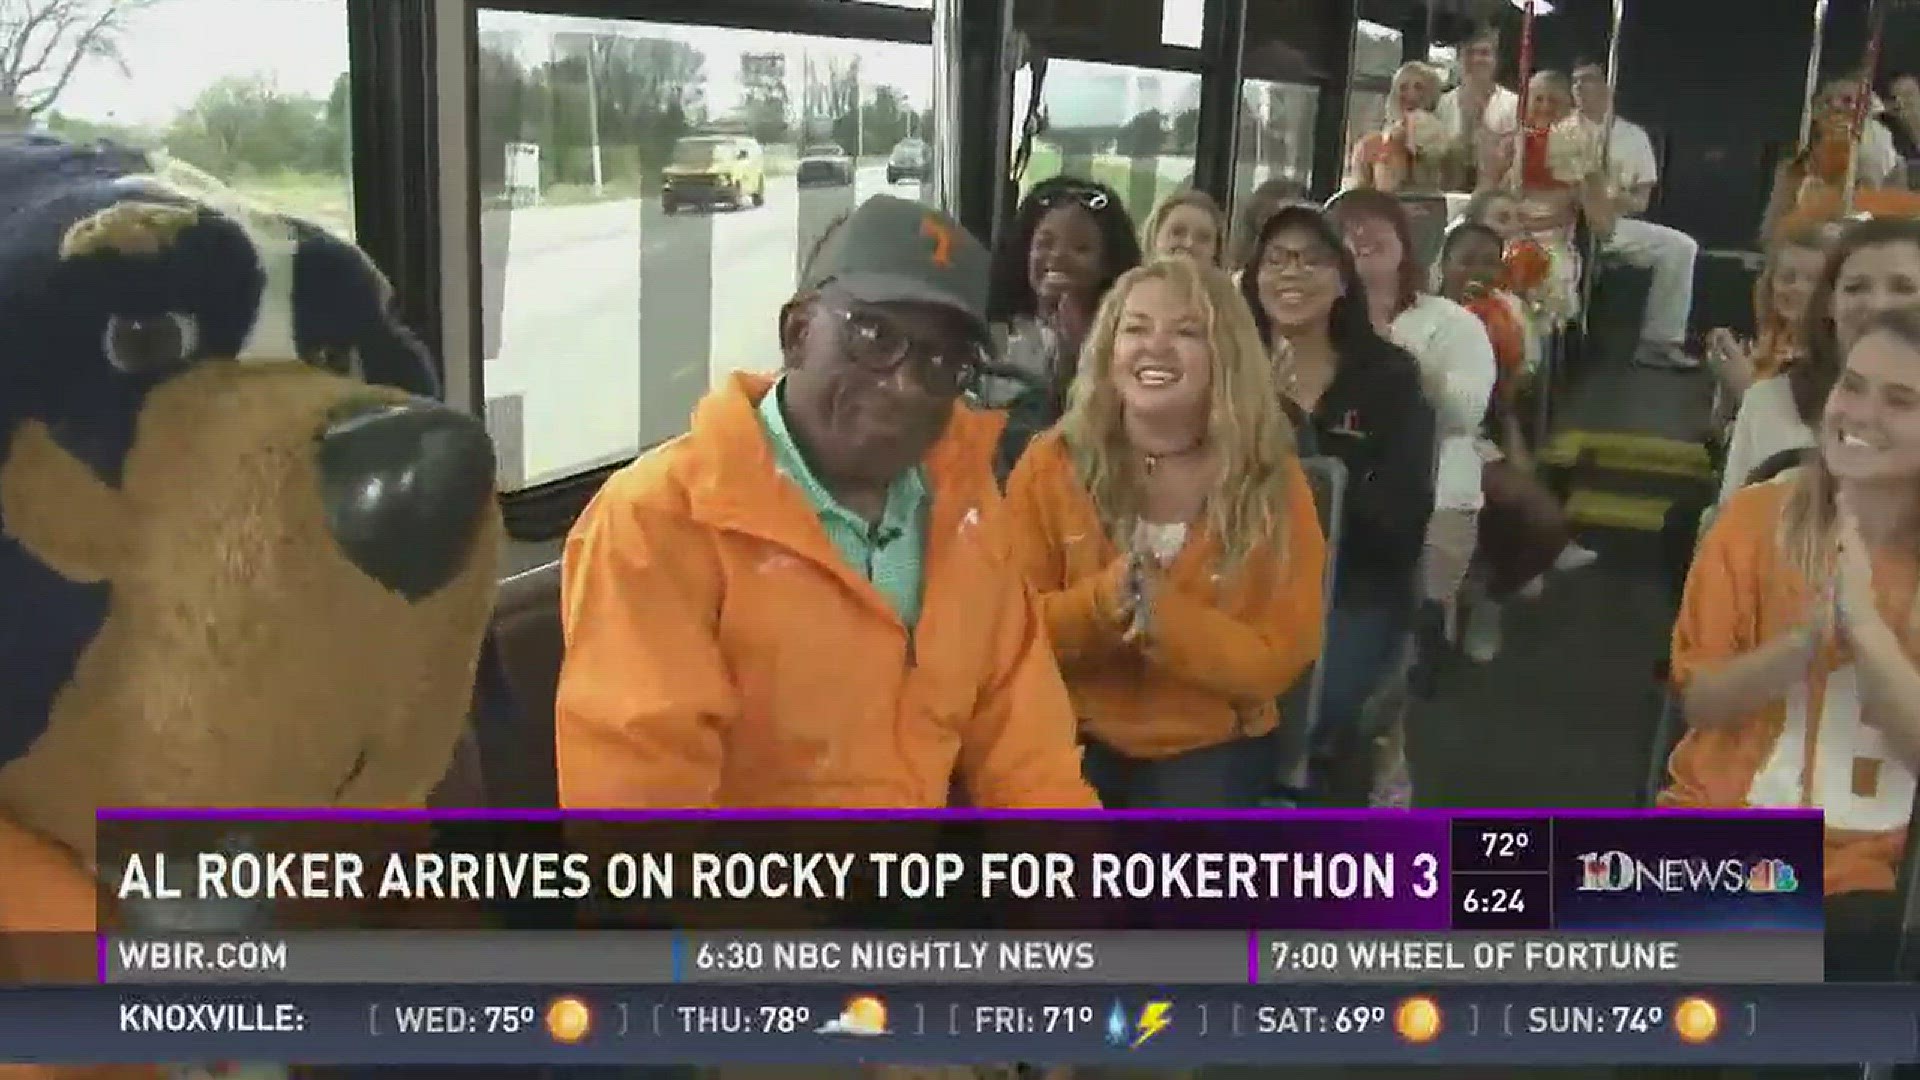 March 28, 2017: Al Roker from NBC's Today show has arrived on Rocky Top for Rokerthon 3.